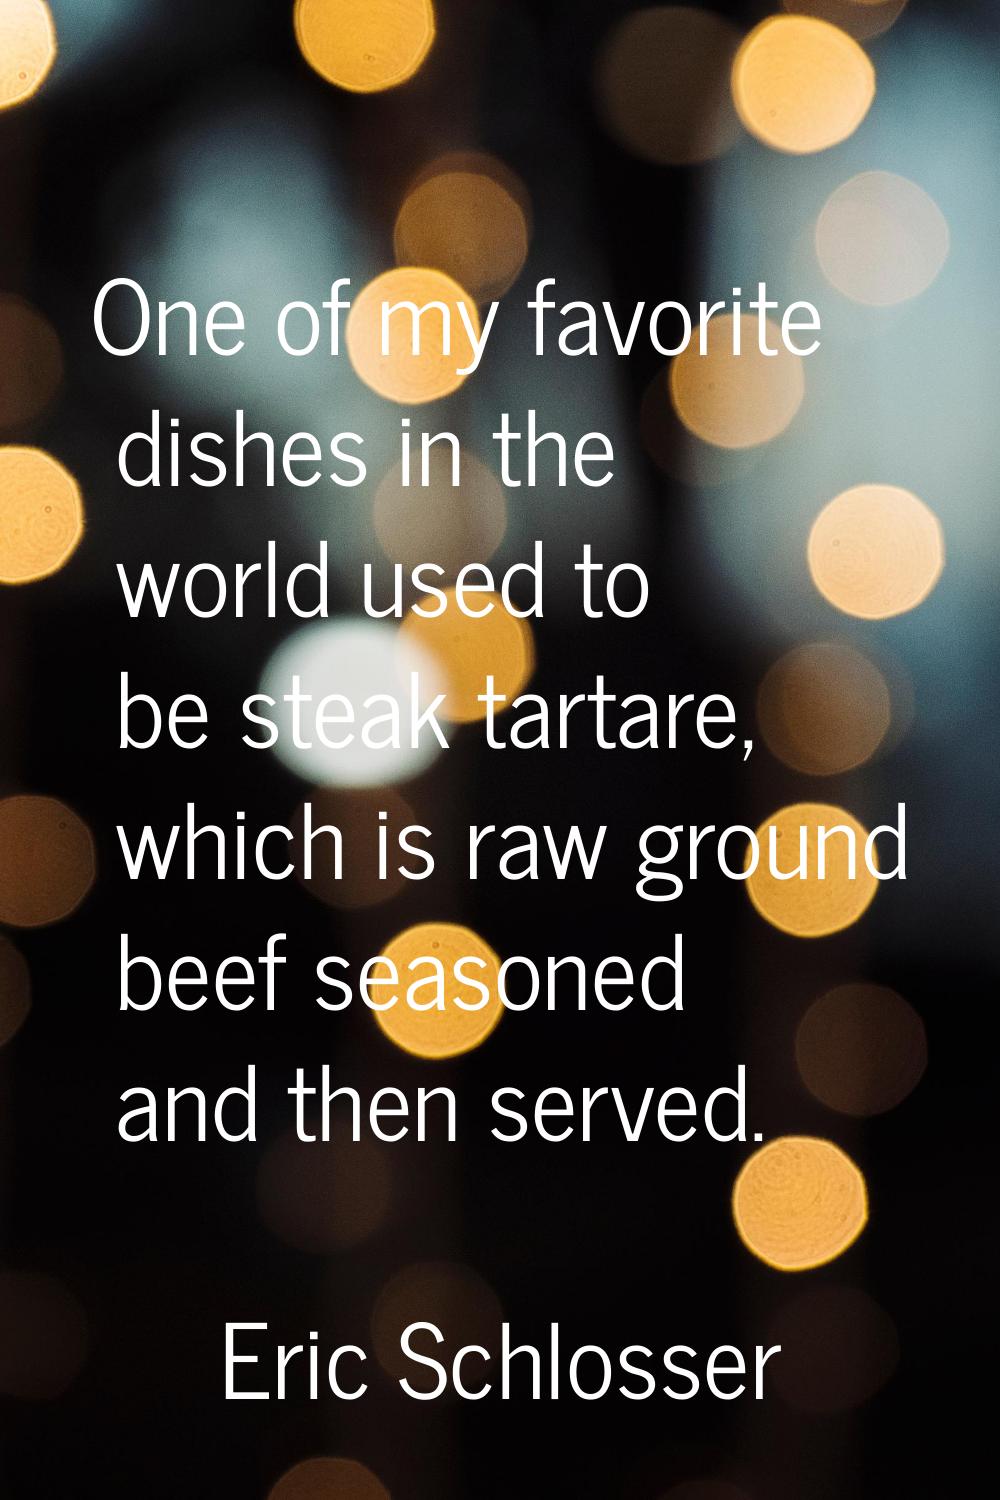 One of my favorite dishes in the world used to be steak tartare, which is raw ground beef seasoned 